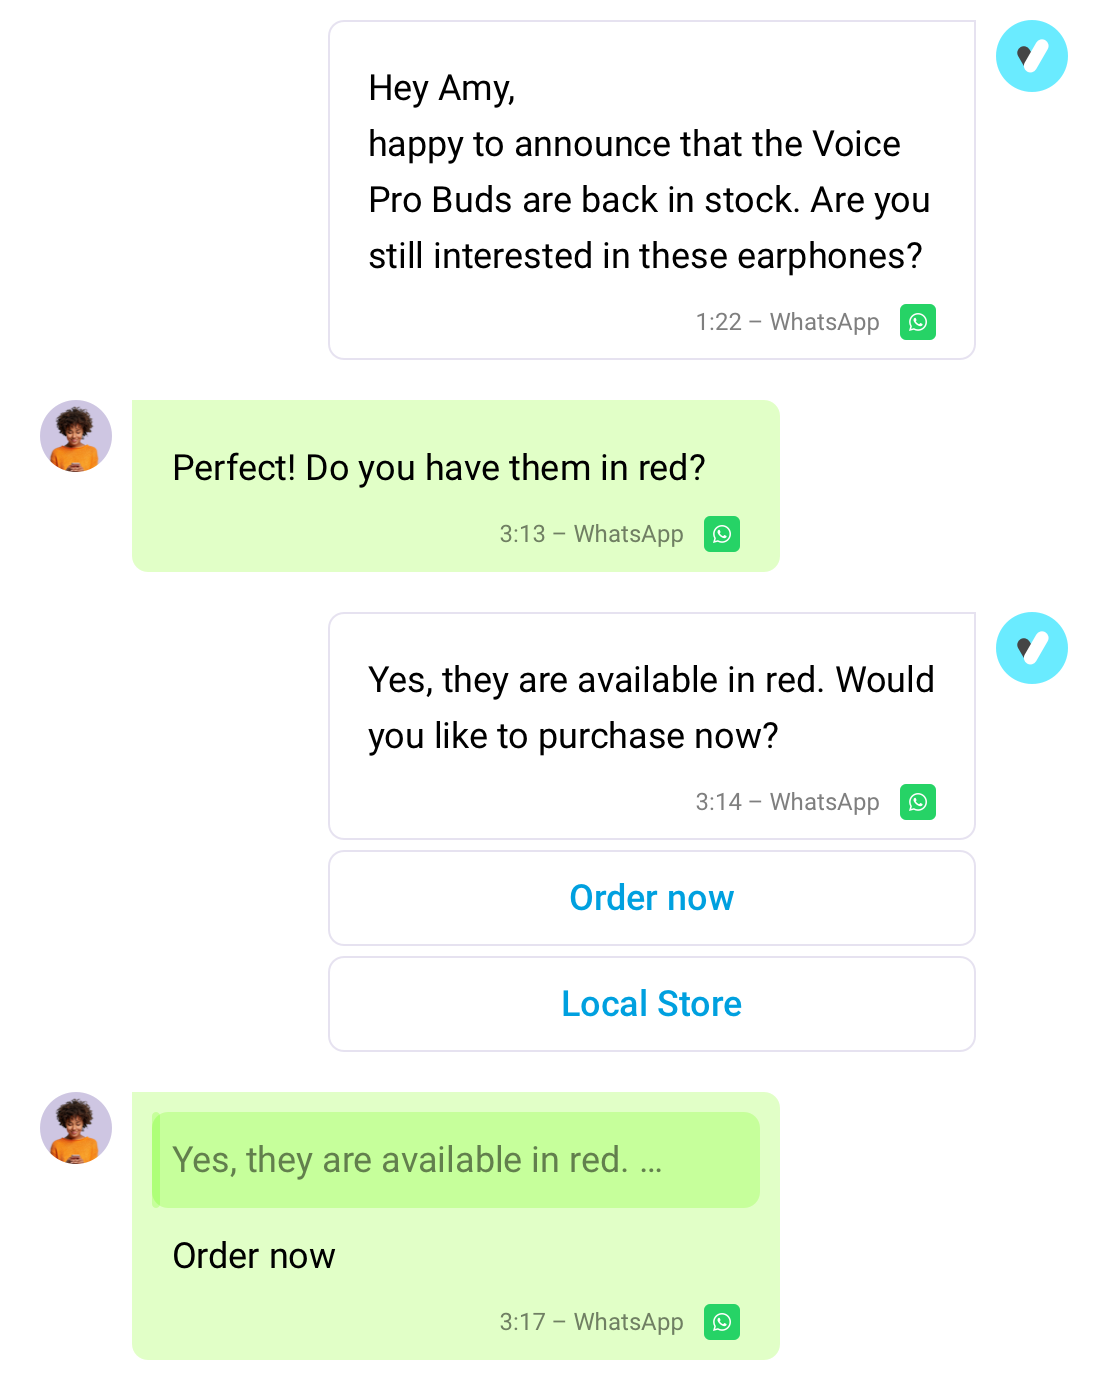 image_whatsapp_business_use_cases_conversational_commerce_2x